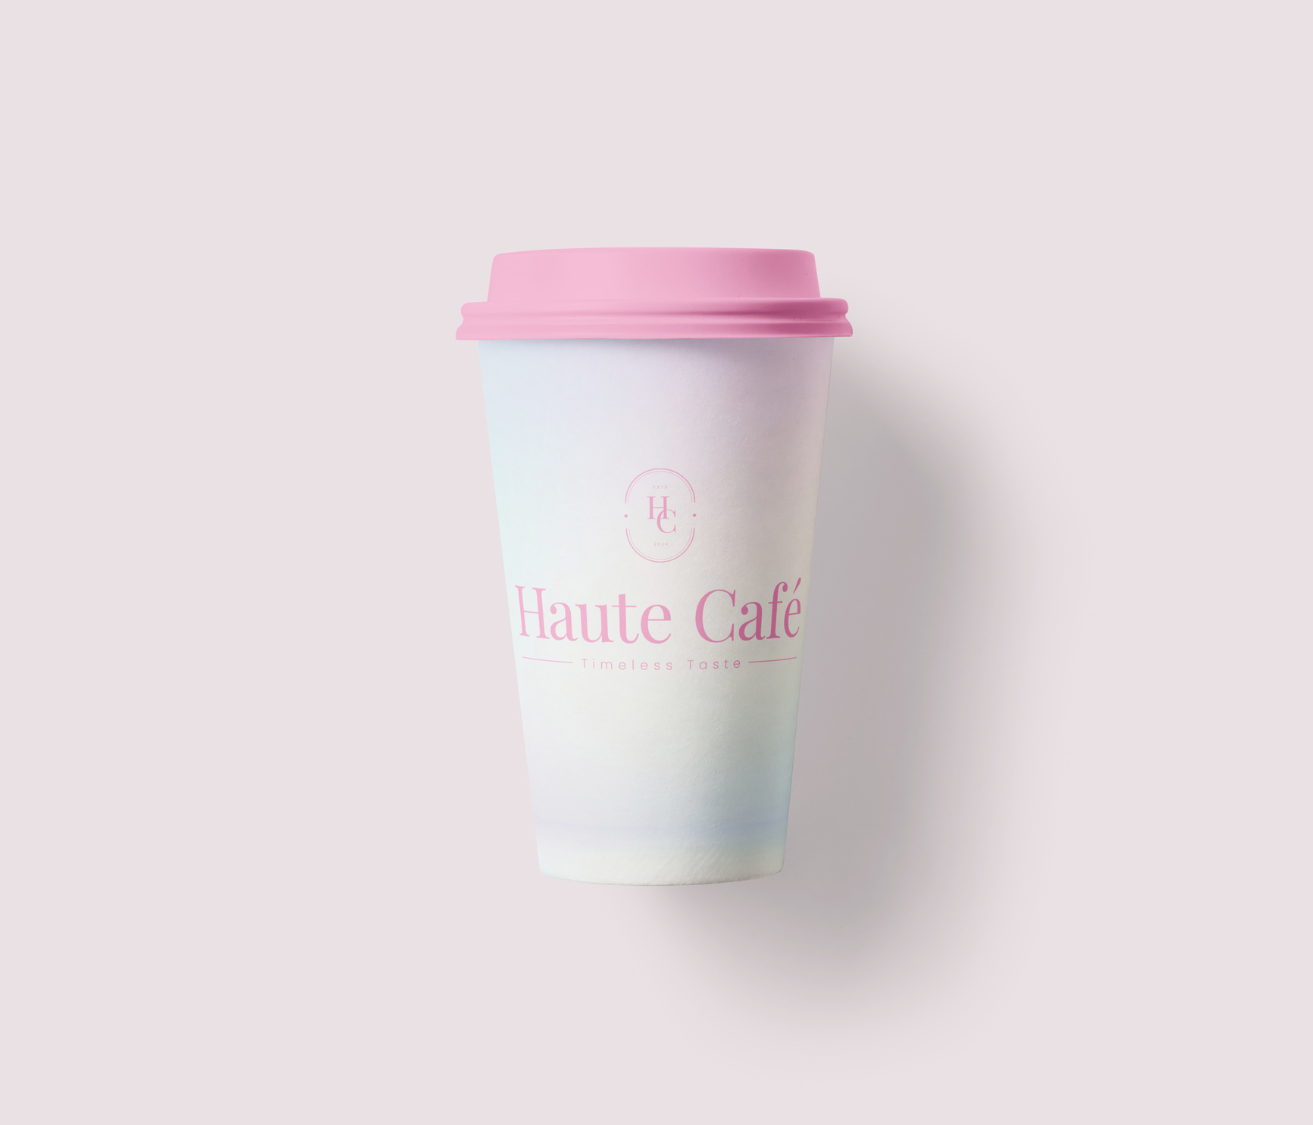 haute cafe luxury coffee cup